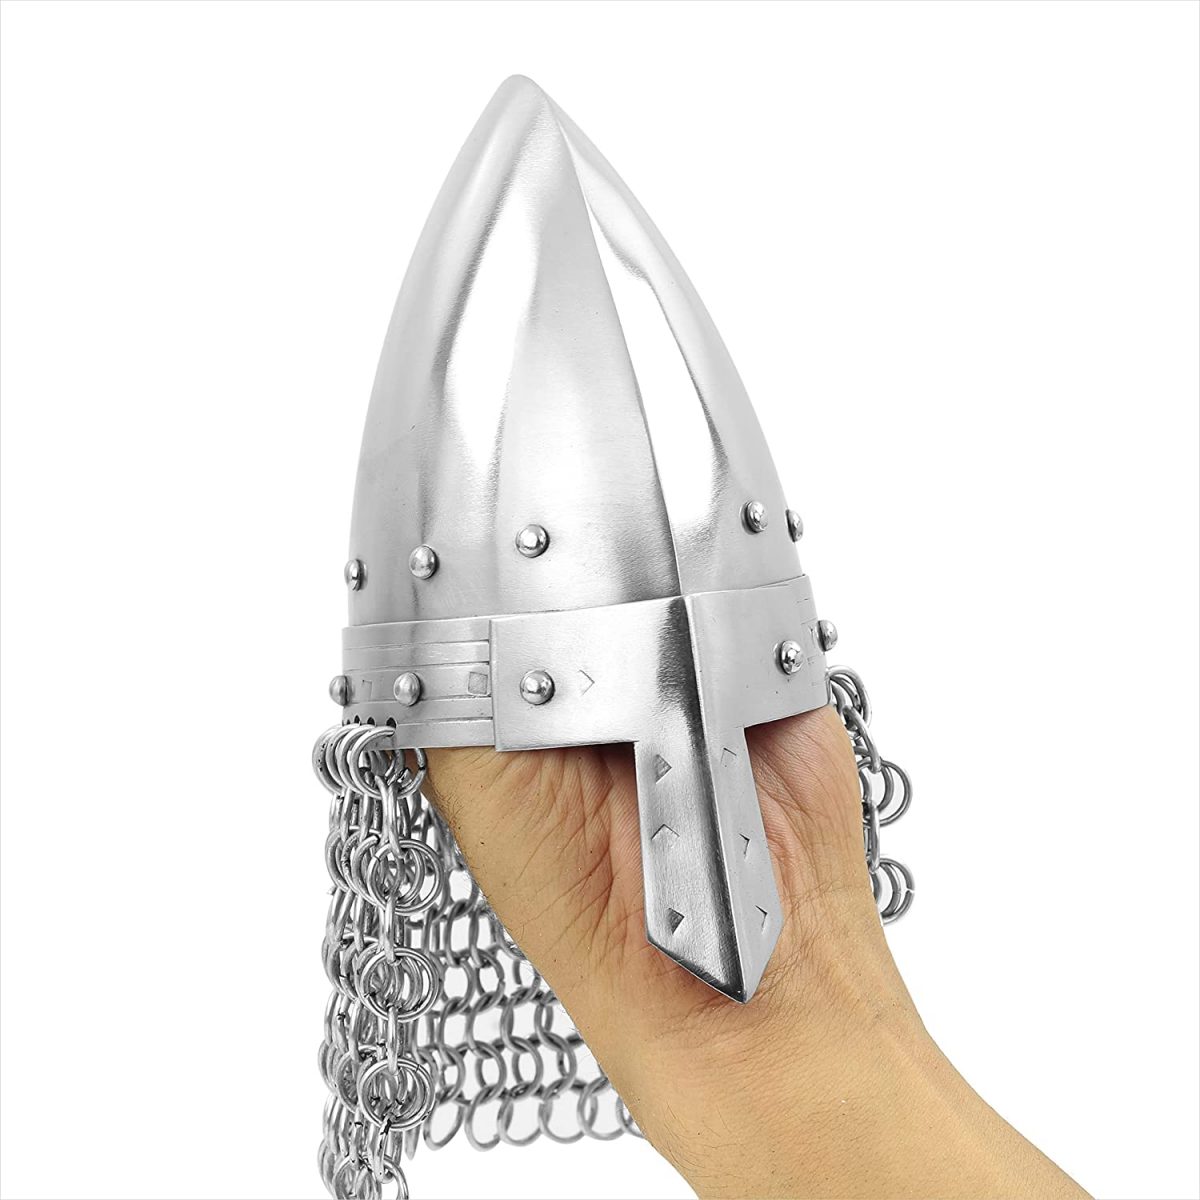 Medieval Nasal Norman Warrior Crusader Helmet with Chain Mail (Miniature) | Fantastic Birthday Gifts Ideas, Toys & Desk Decor